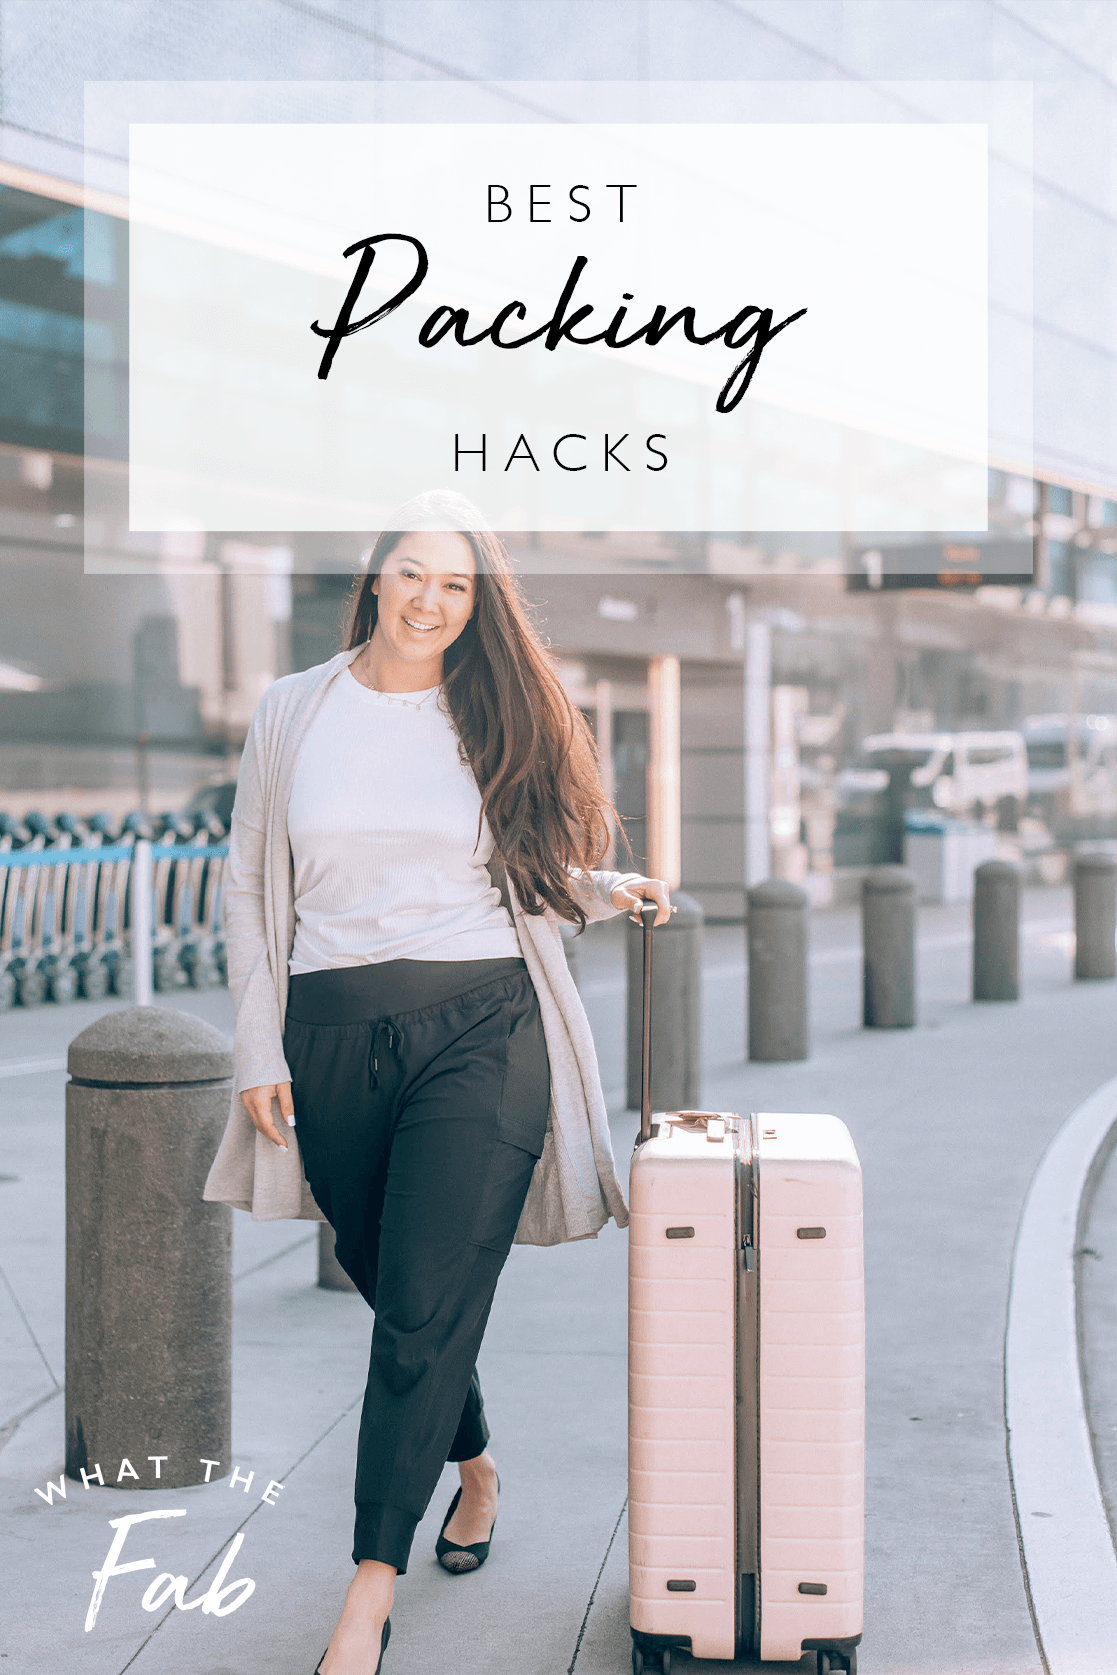 Best Packing Hacks, by Travel Blogger What The Fab